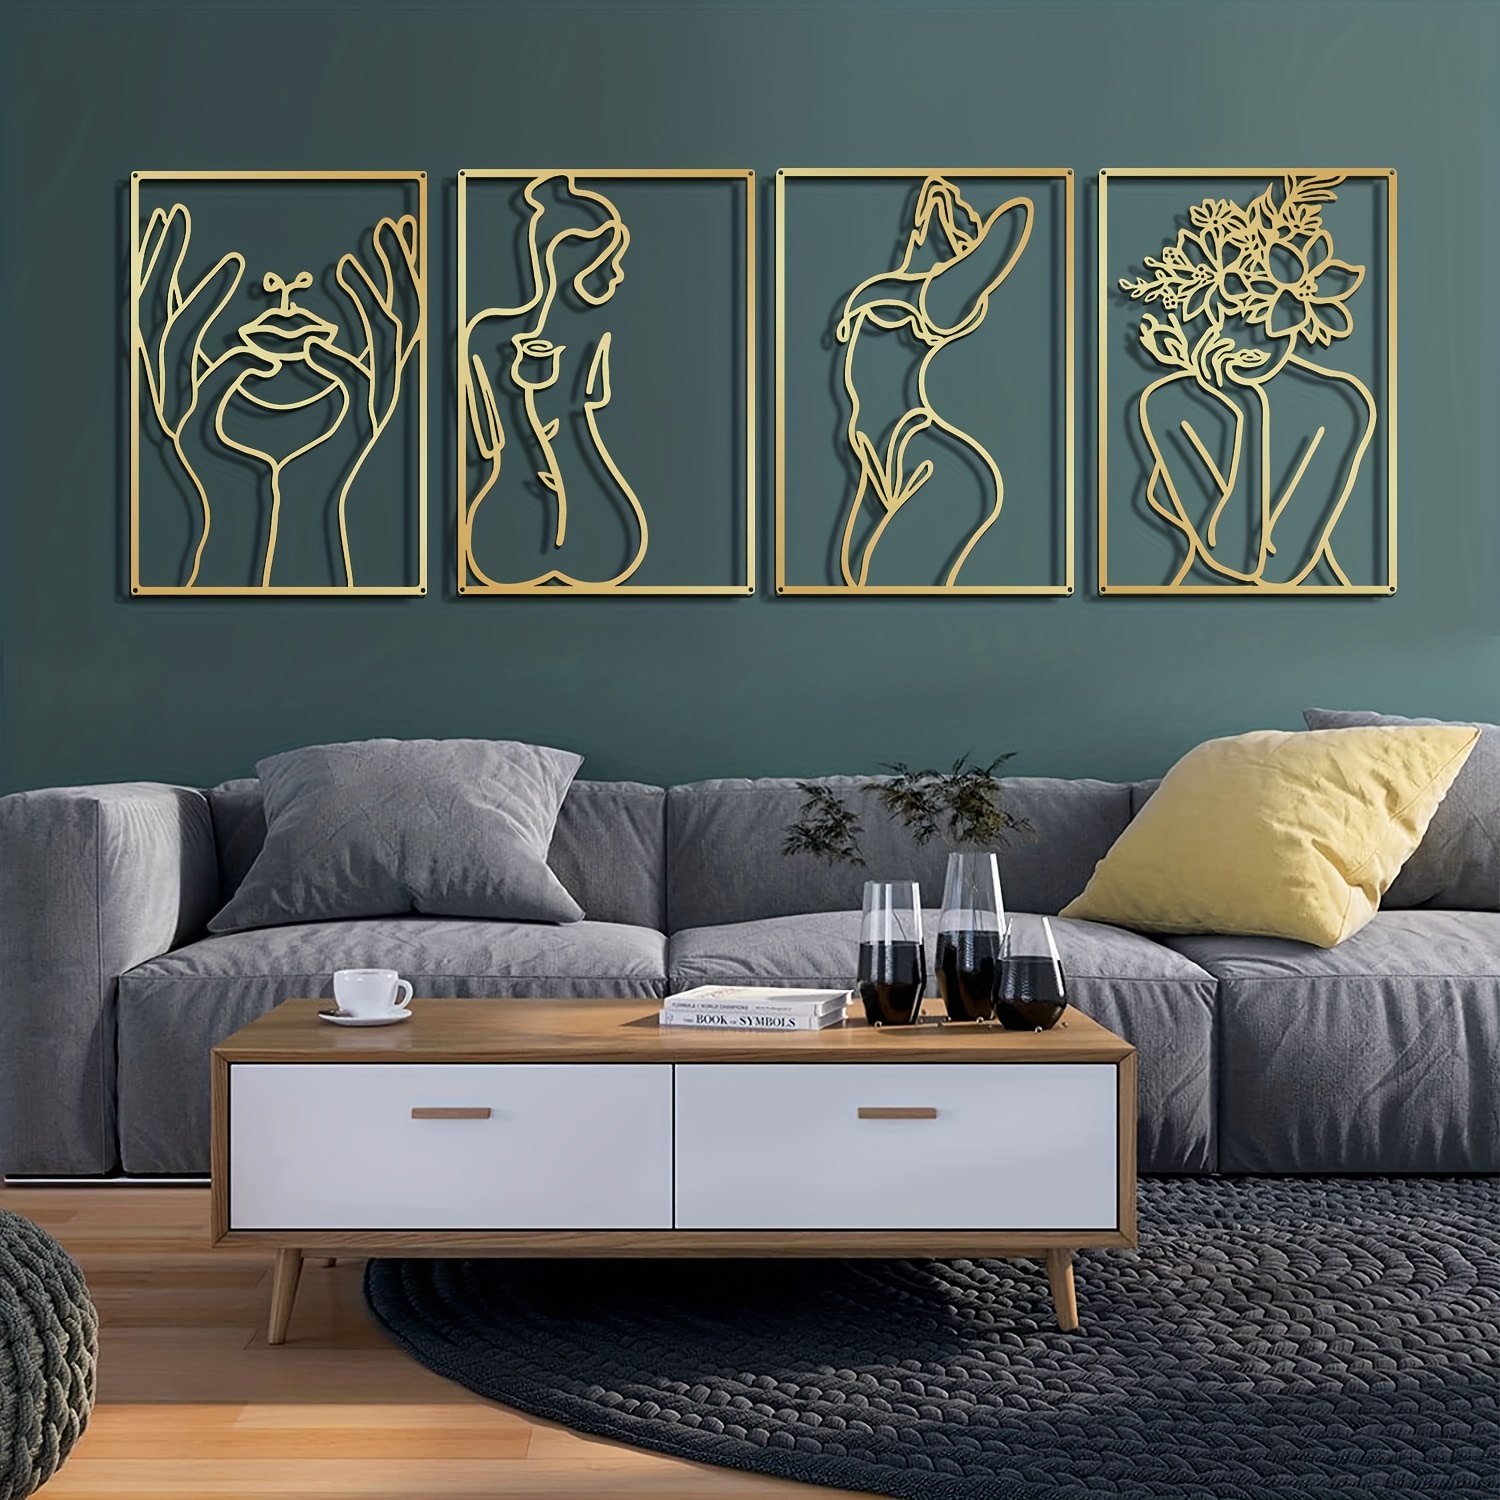 Modern Metal Wall Decor - Abstract Female Silhouette Sculpture For ...